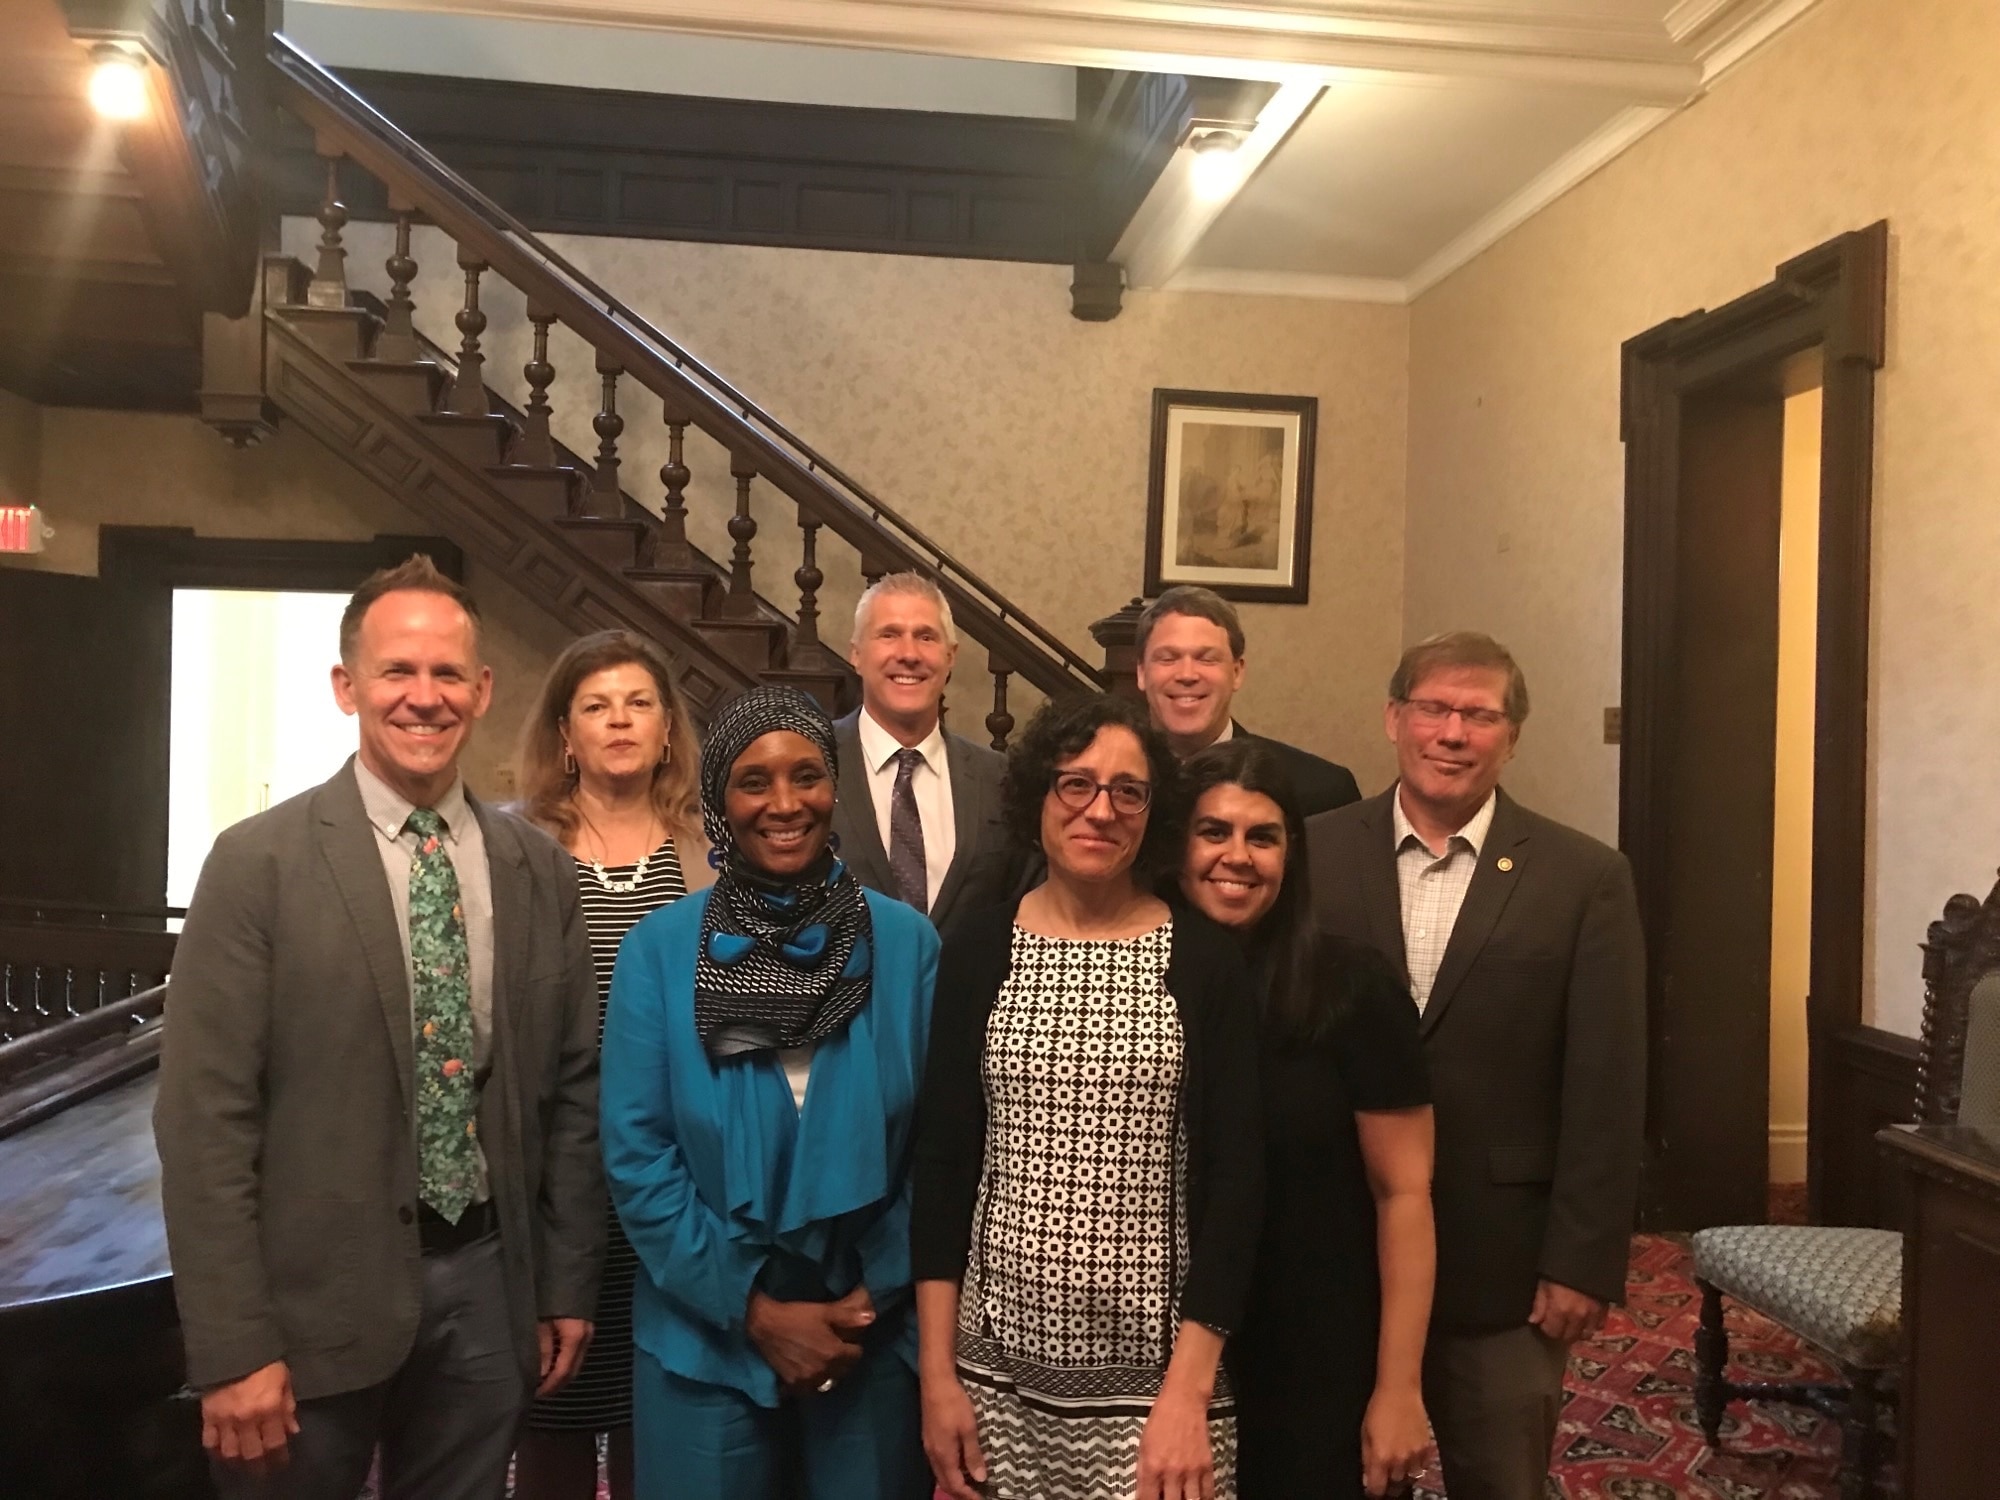 HHS Region 2 Director Dara Kass pictured with representatives of six Federally Qualified Health Centers (FQHCs) in Western New York that collectively provide health care to over 120,000 people annually.